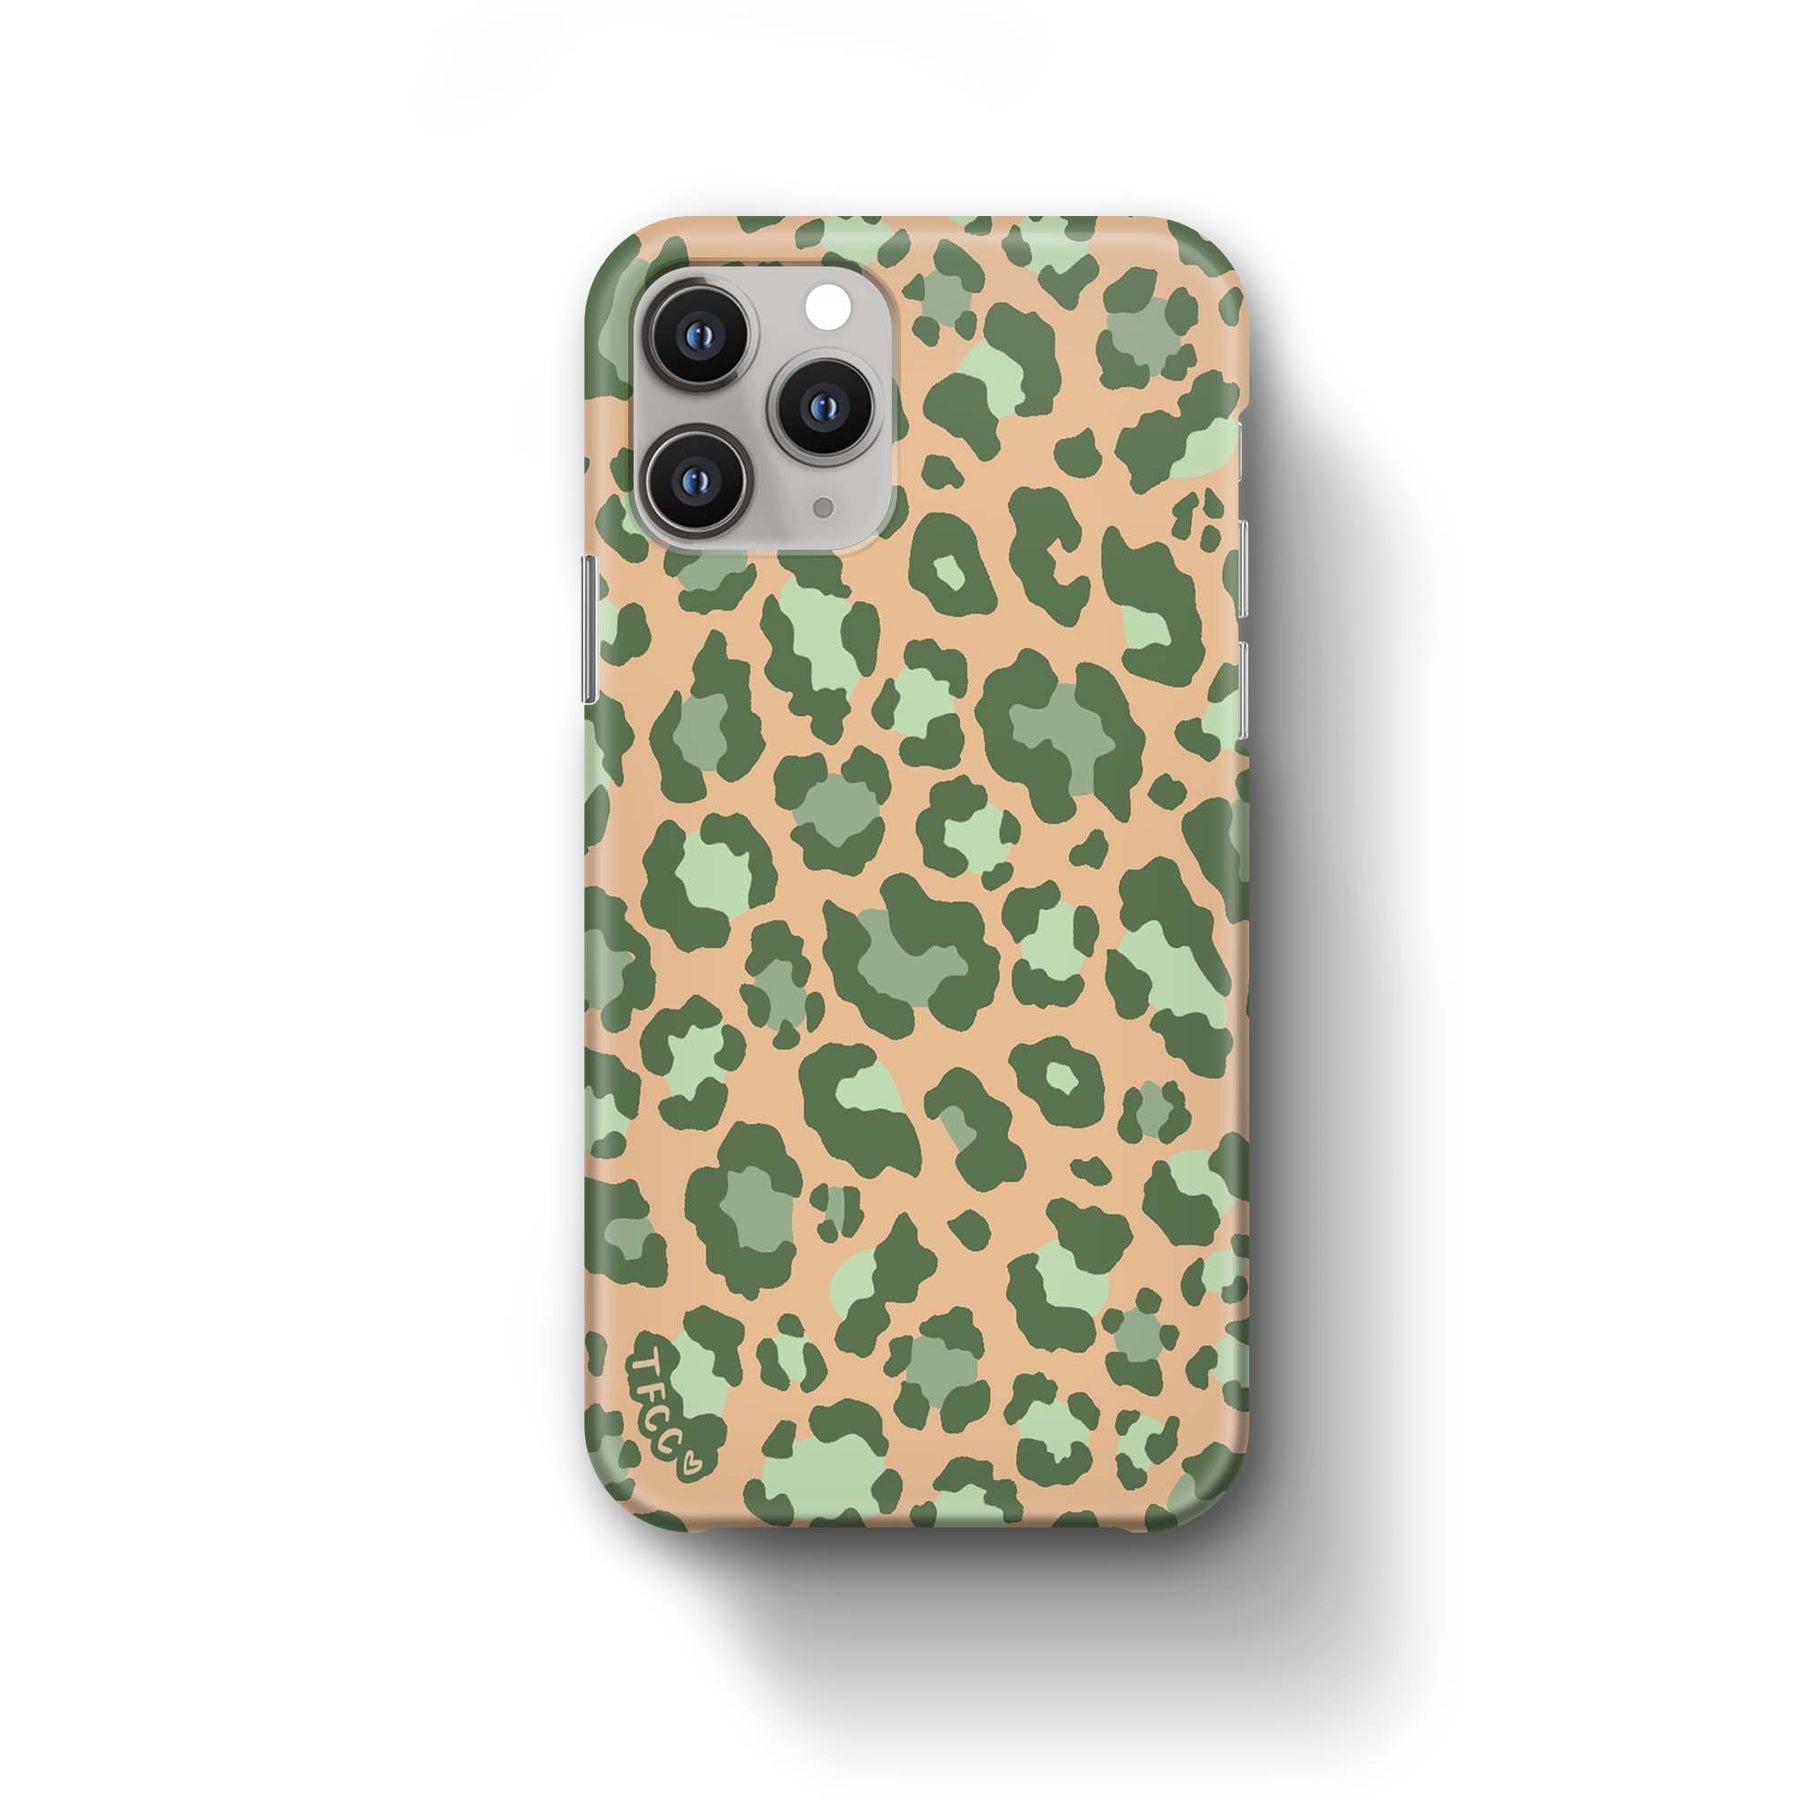 WILD THOUGHTS CASE - thefonecasecompany